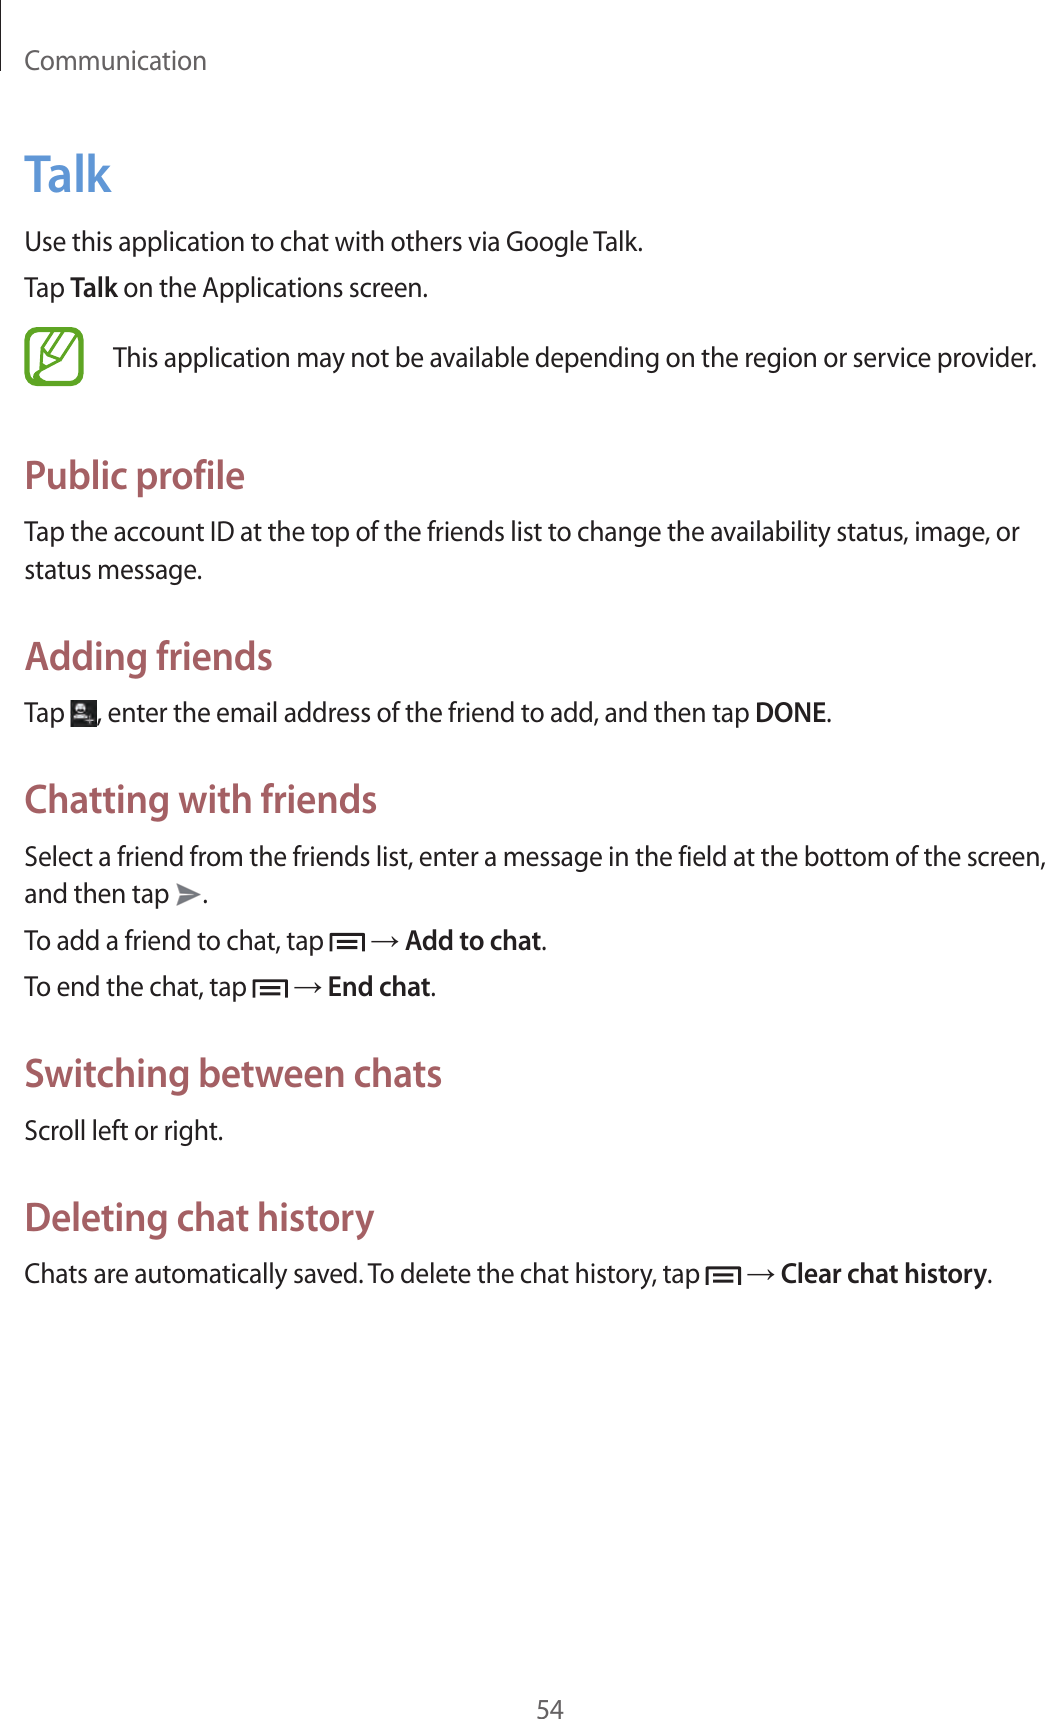 Communication54TalkUse this application to chat with others via Google Talk.Tap Talk on the Applications screen.This application may not be available depending on the region or service provider.Public profileTap the account ID at the top of the friends list to change the availability status, image, or status message.Adding friendsTap  , enter the email address of the friend to add, and then tap DONE.Chatting with friendsSelect a friend from the friends list, enter a message in the field at the bottom of the screen, and then tap  .To add a friend to chat, tap   → Add to chat.To end the chat, tap   → End chat.Switching between chatsScroll left or right.Deleting chat historyChats are automatically saved. To delete the chat history, tap   → Clear chat history.